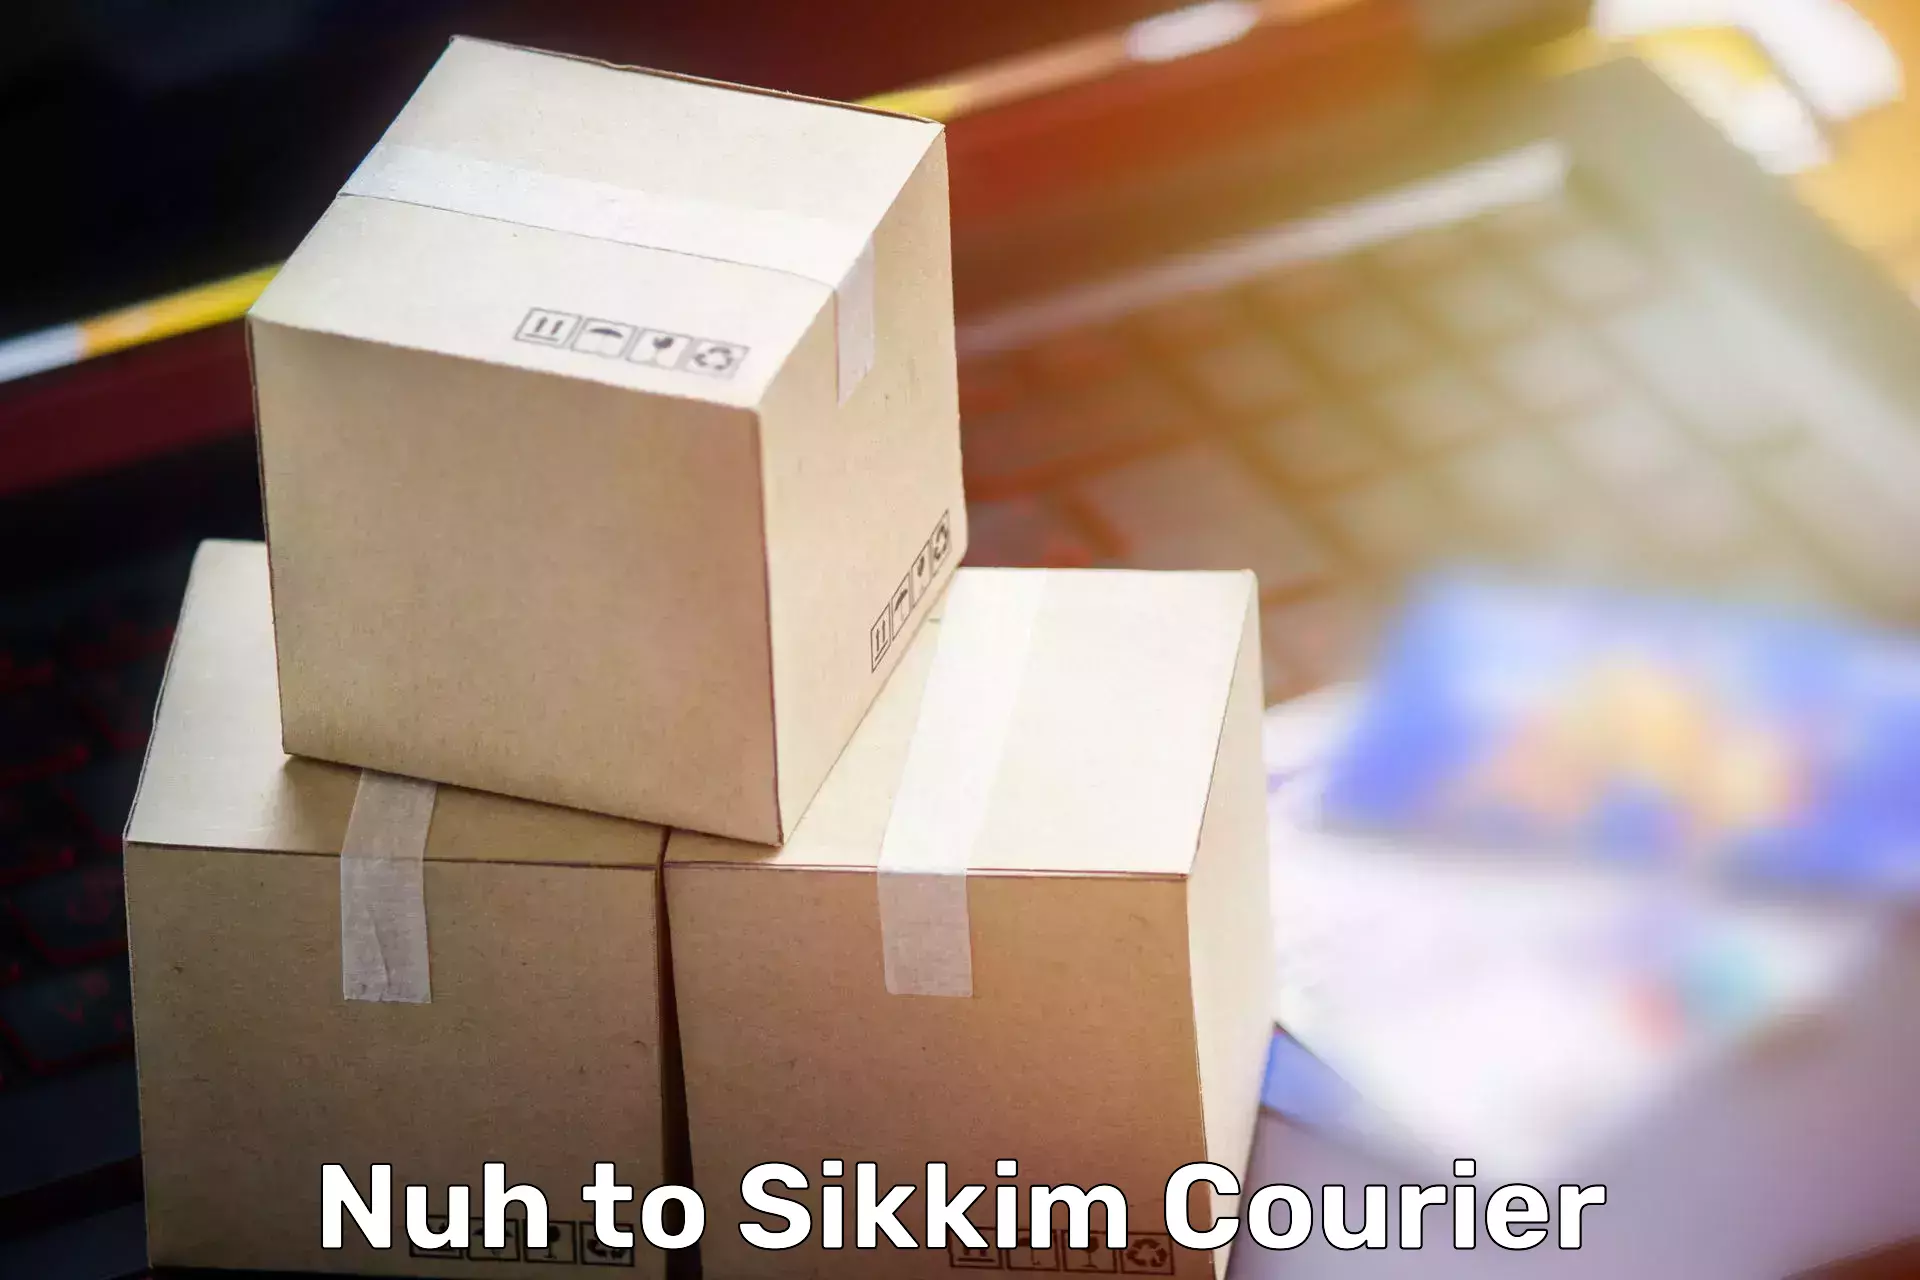 Furniture transport specialists Nuh to East Sikkim